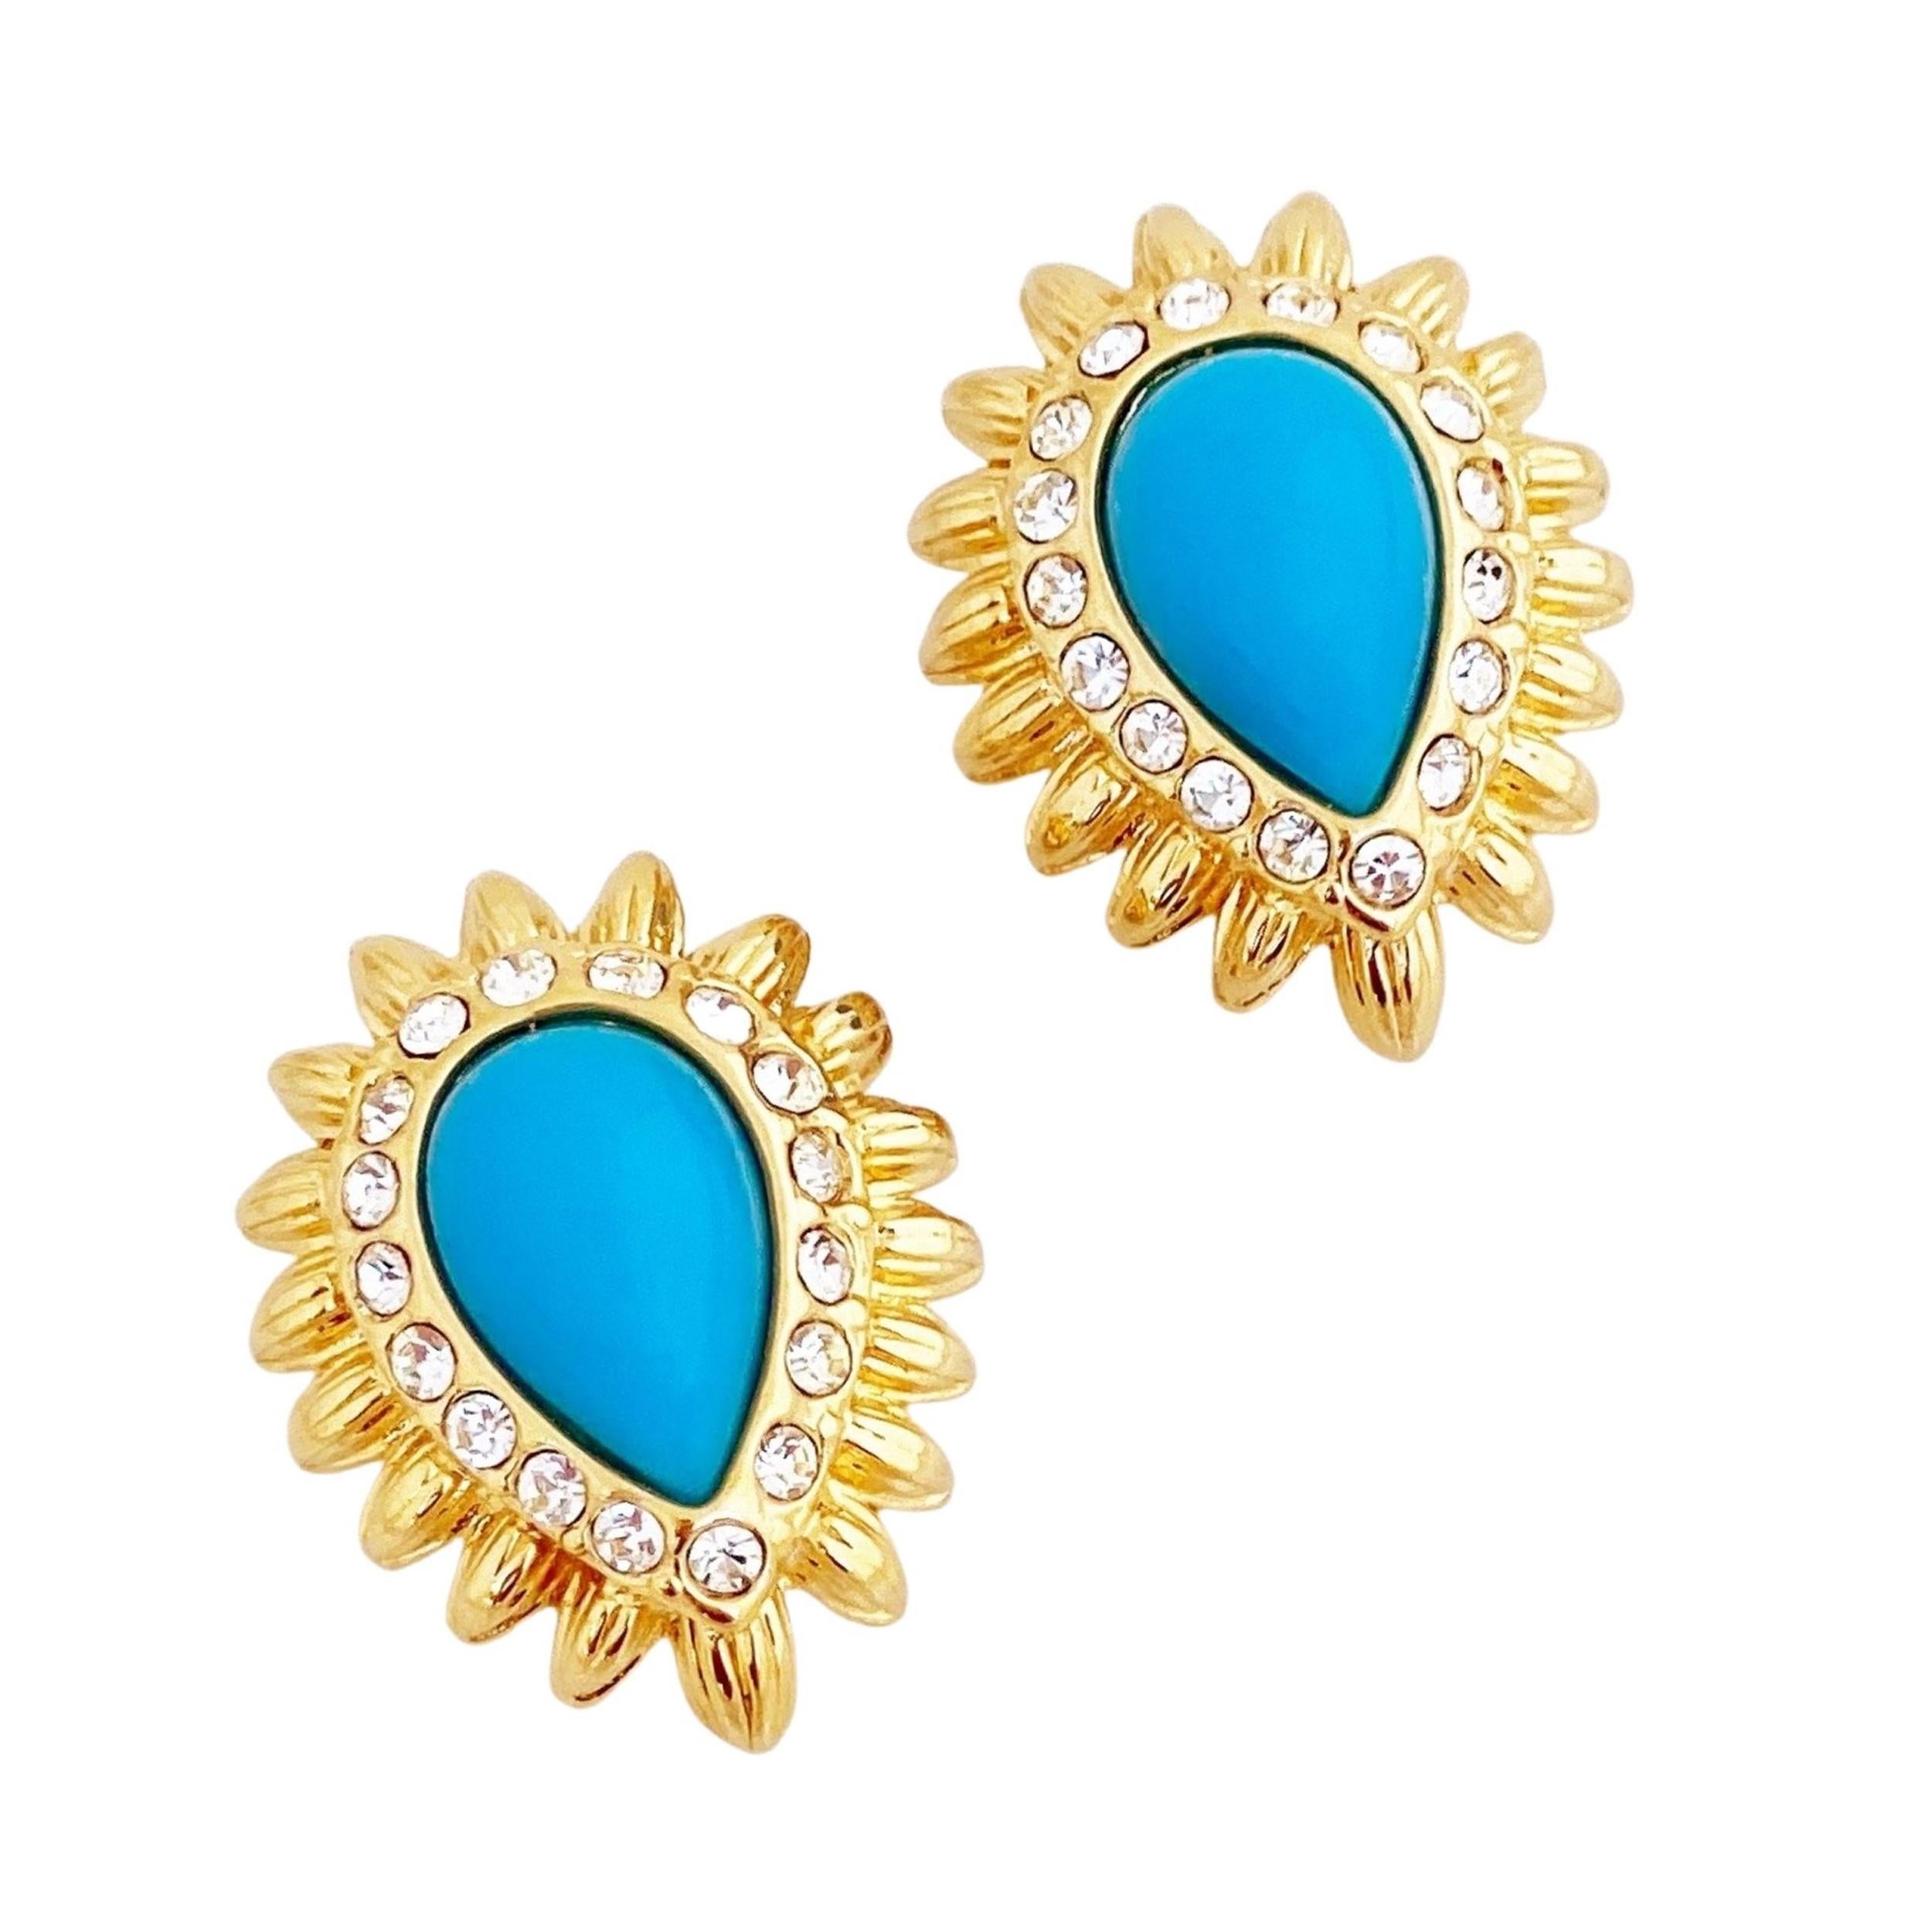 Gold & Turquoise Teardrop Sunburst Earrings With Crystal Accents By Nolan Miller For Sale